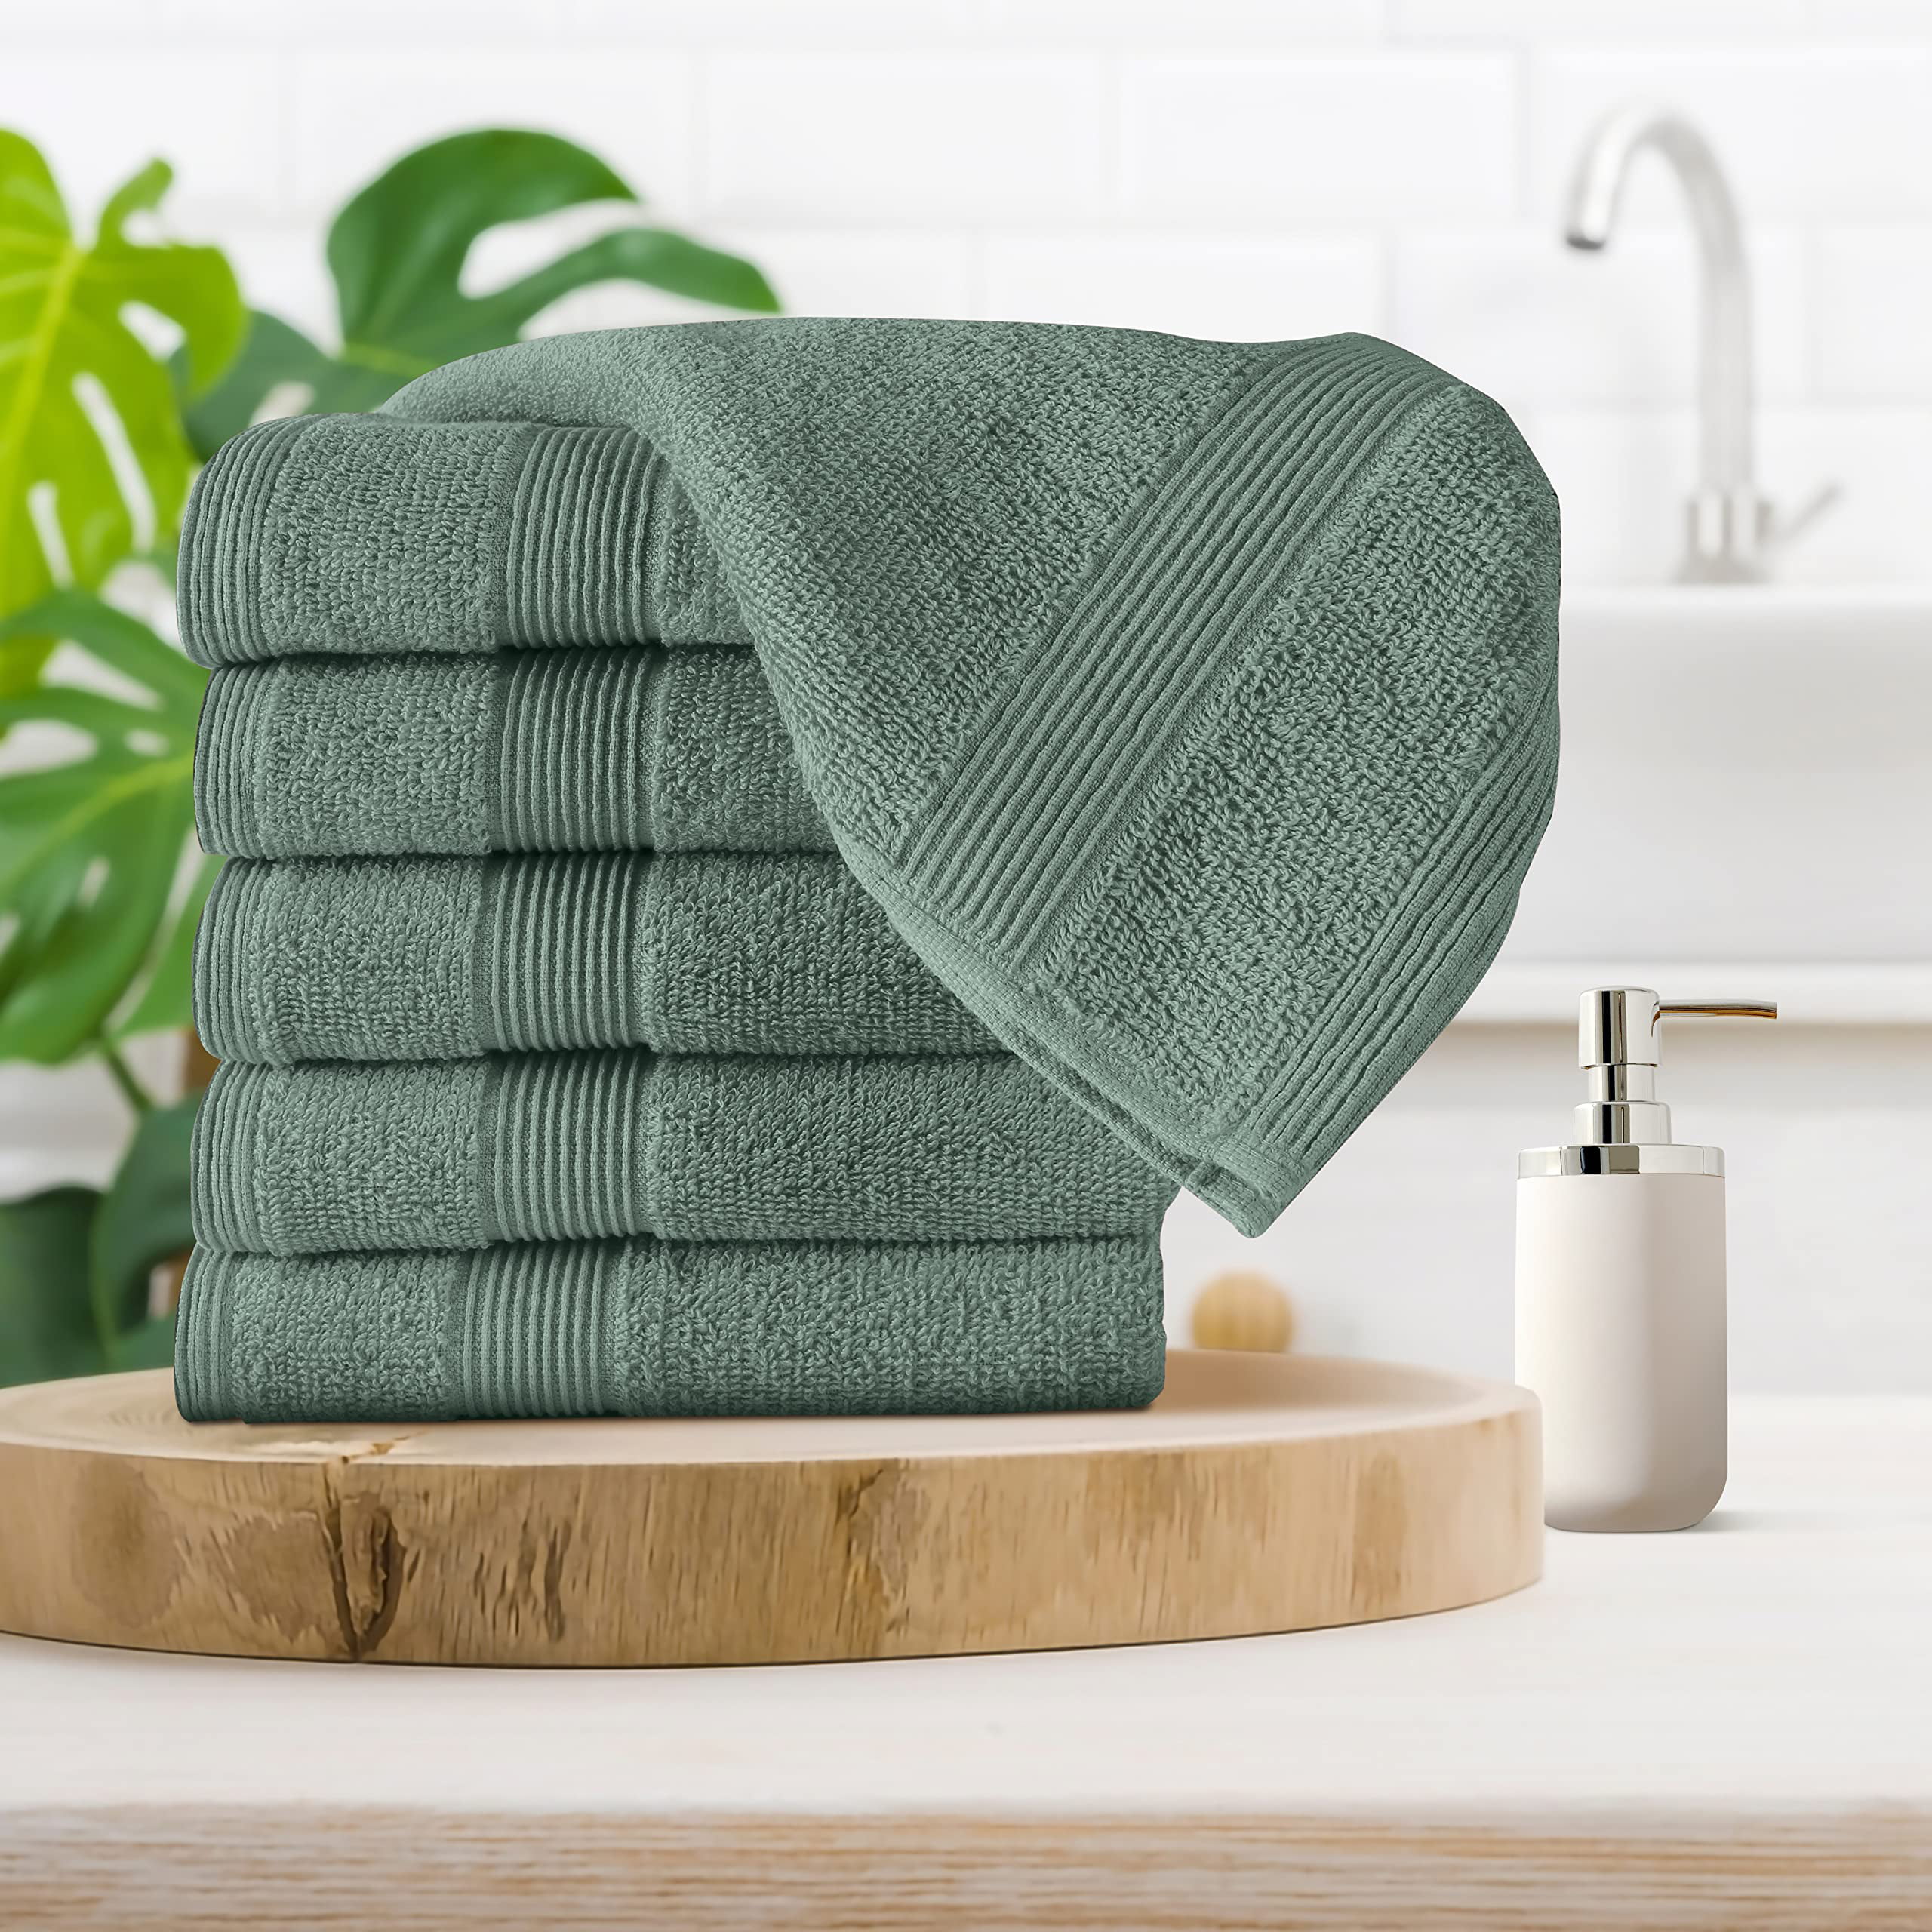 Belizzi Home 8 Piece Towel Set 100% Ring Spun Cotton, 2 Bath Towels 27x54,  2 Hand Towels 16x28 and 4 Washcloths 13x13 - Ultra Soft Highly Absorbent  Machine Washable Hotel Spa Quality - Green - Yahoo Shopping